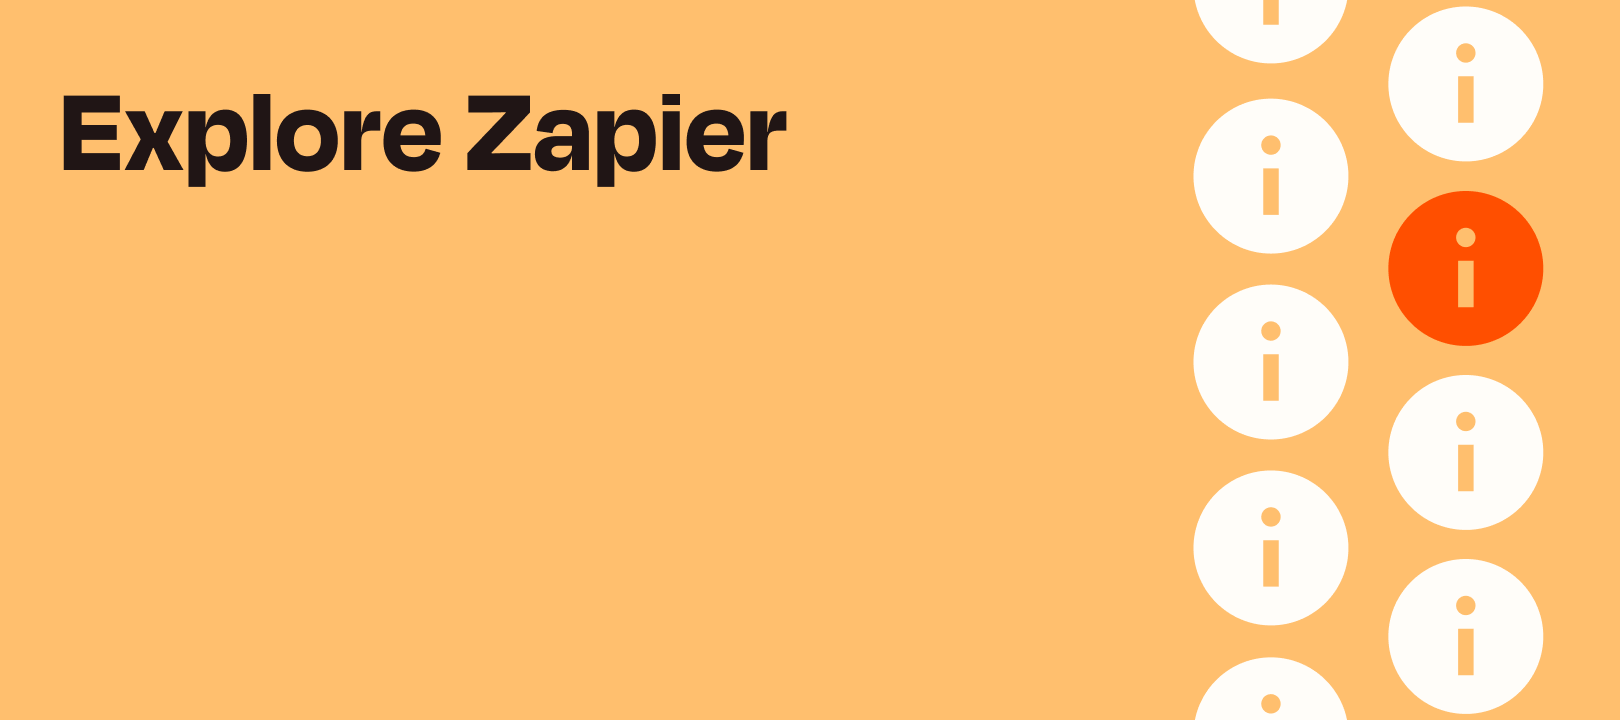 Introducing more ways for new users to explore Zapier